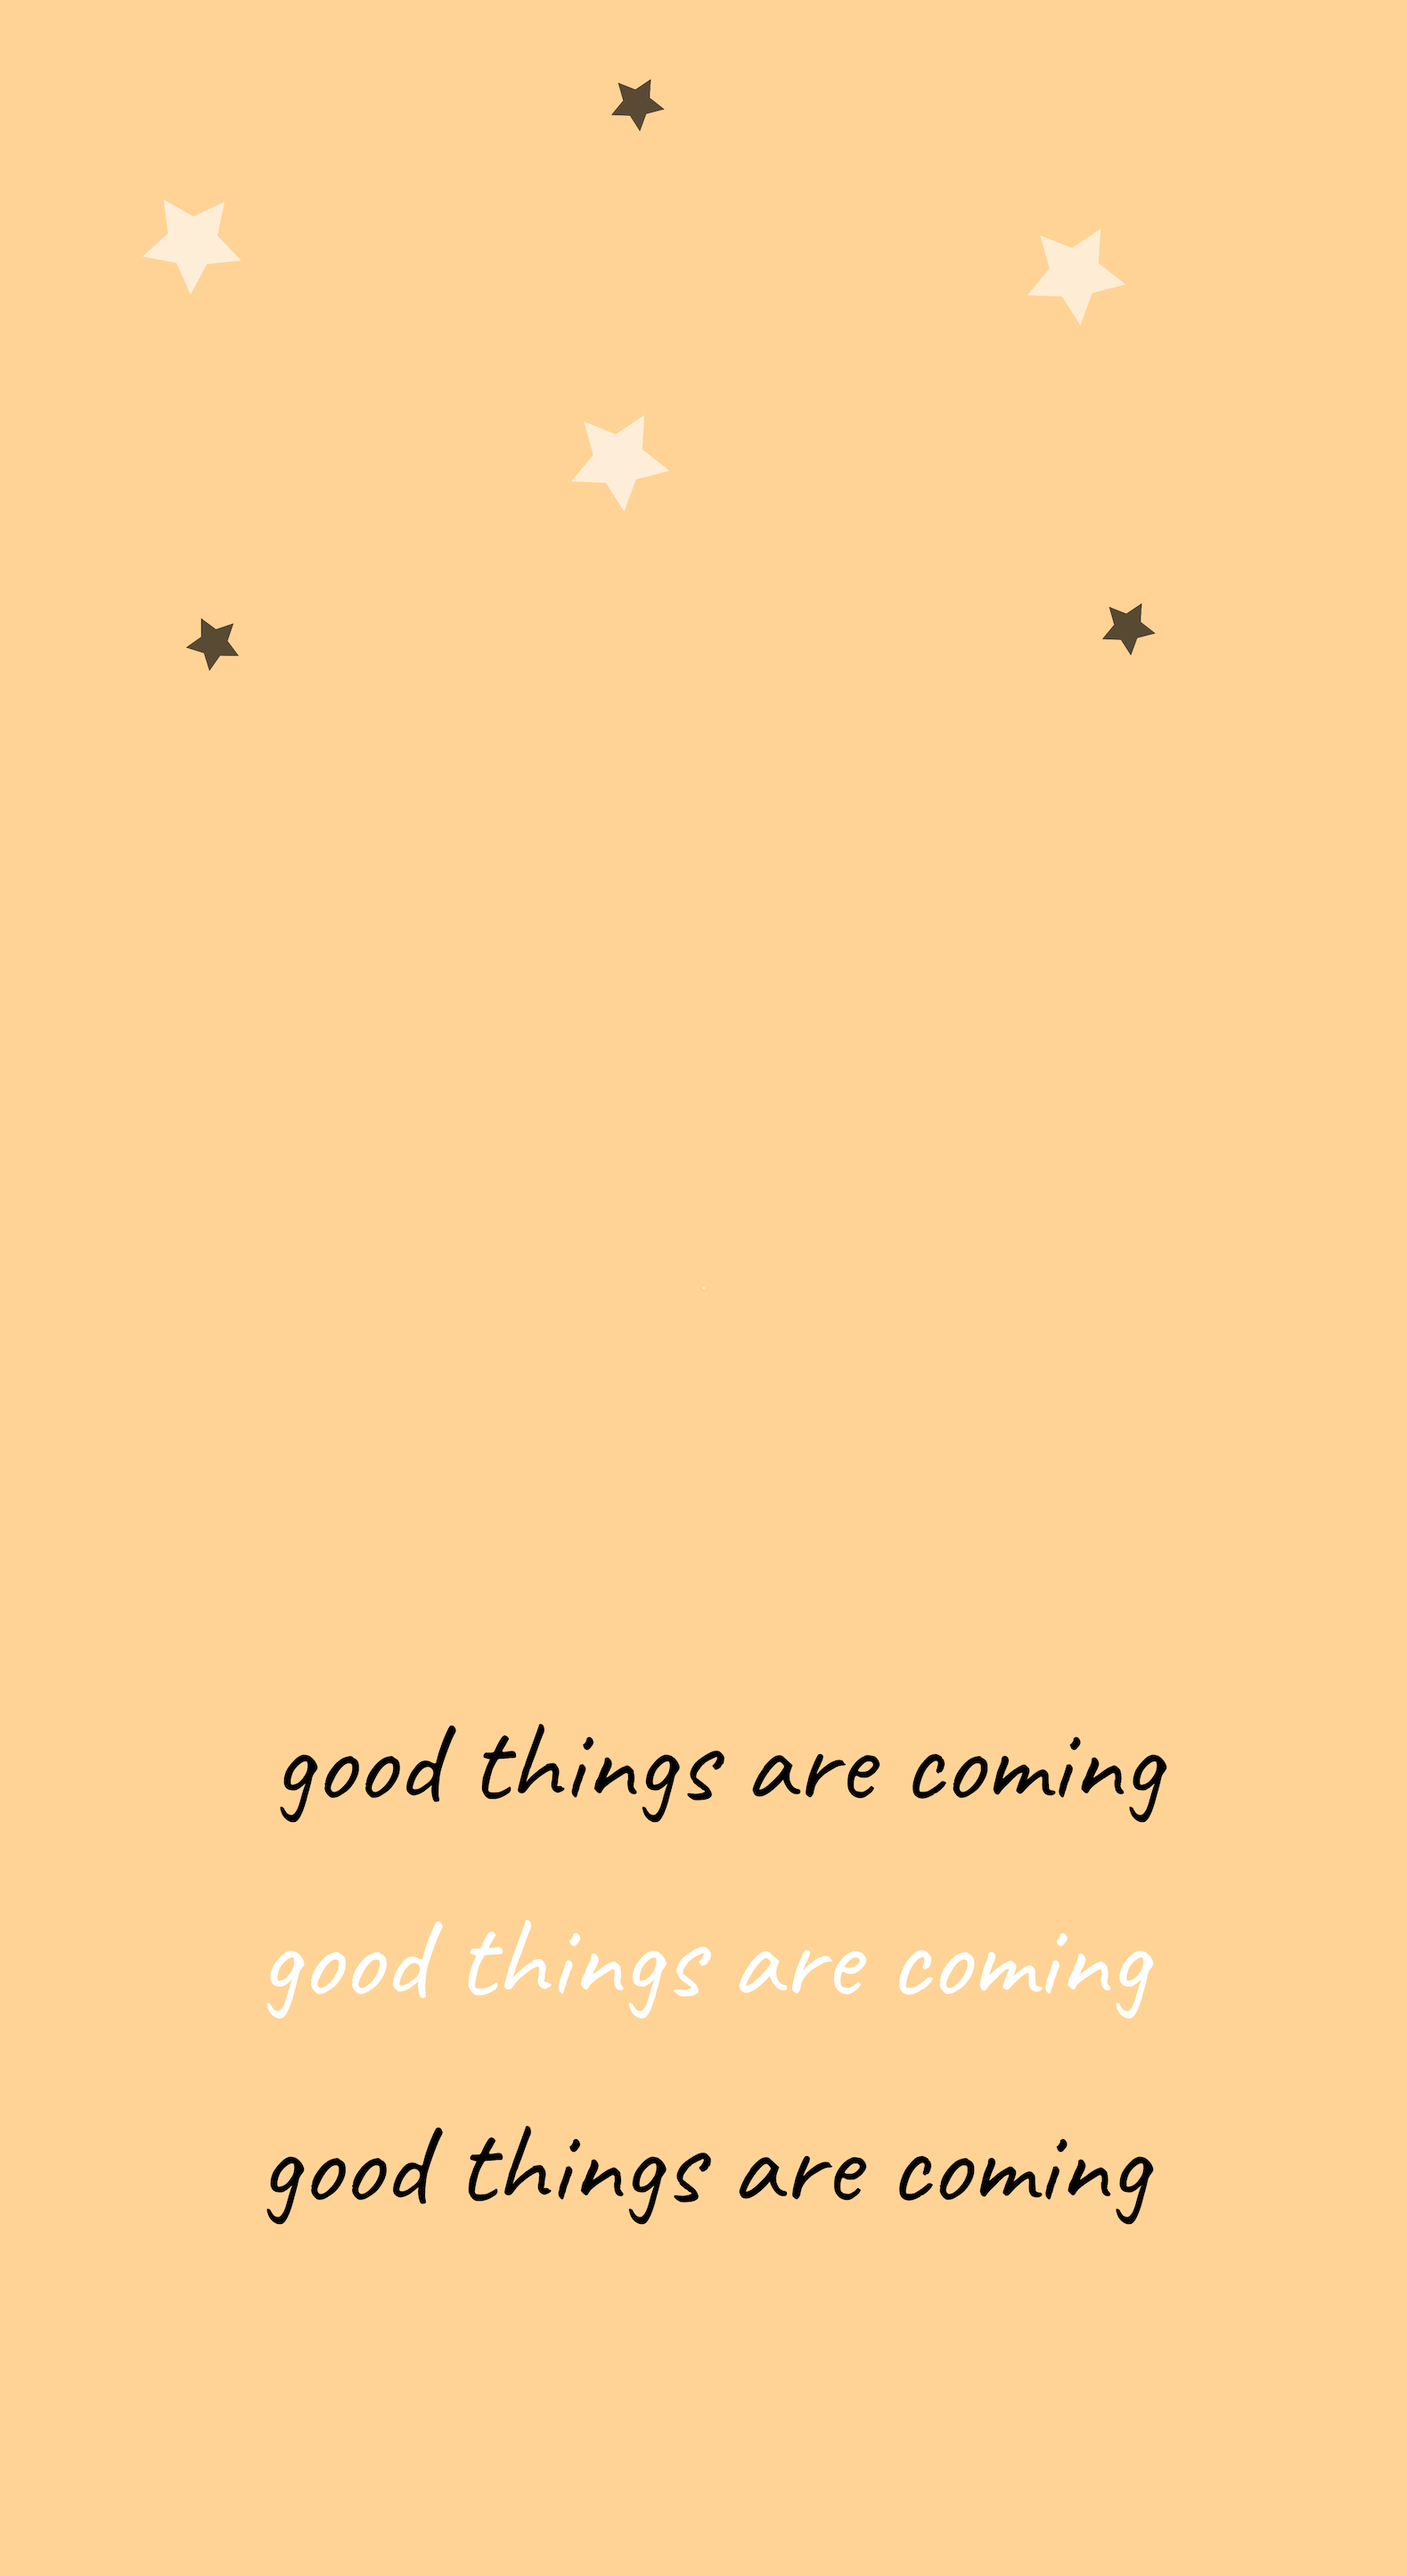 Good things are coming iPhone wallpaper. iPhone wallpaper, Disney phone wallpaper, Wallpaper iphone cute